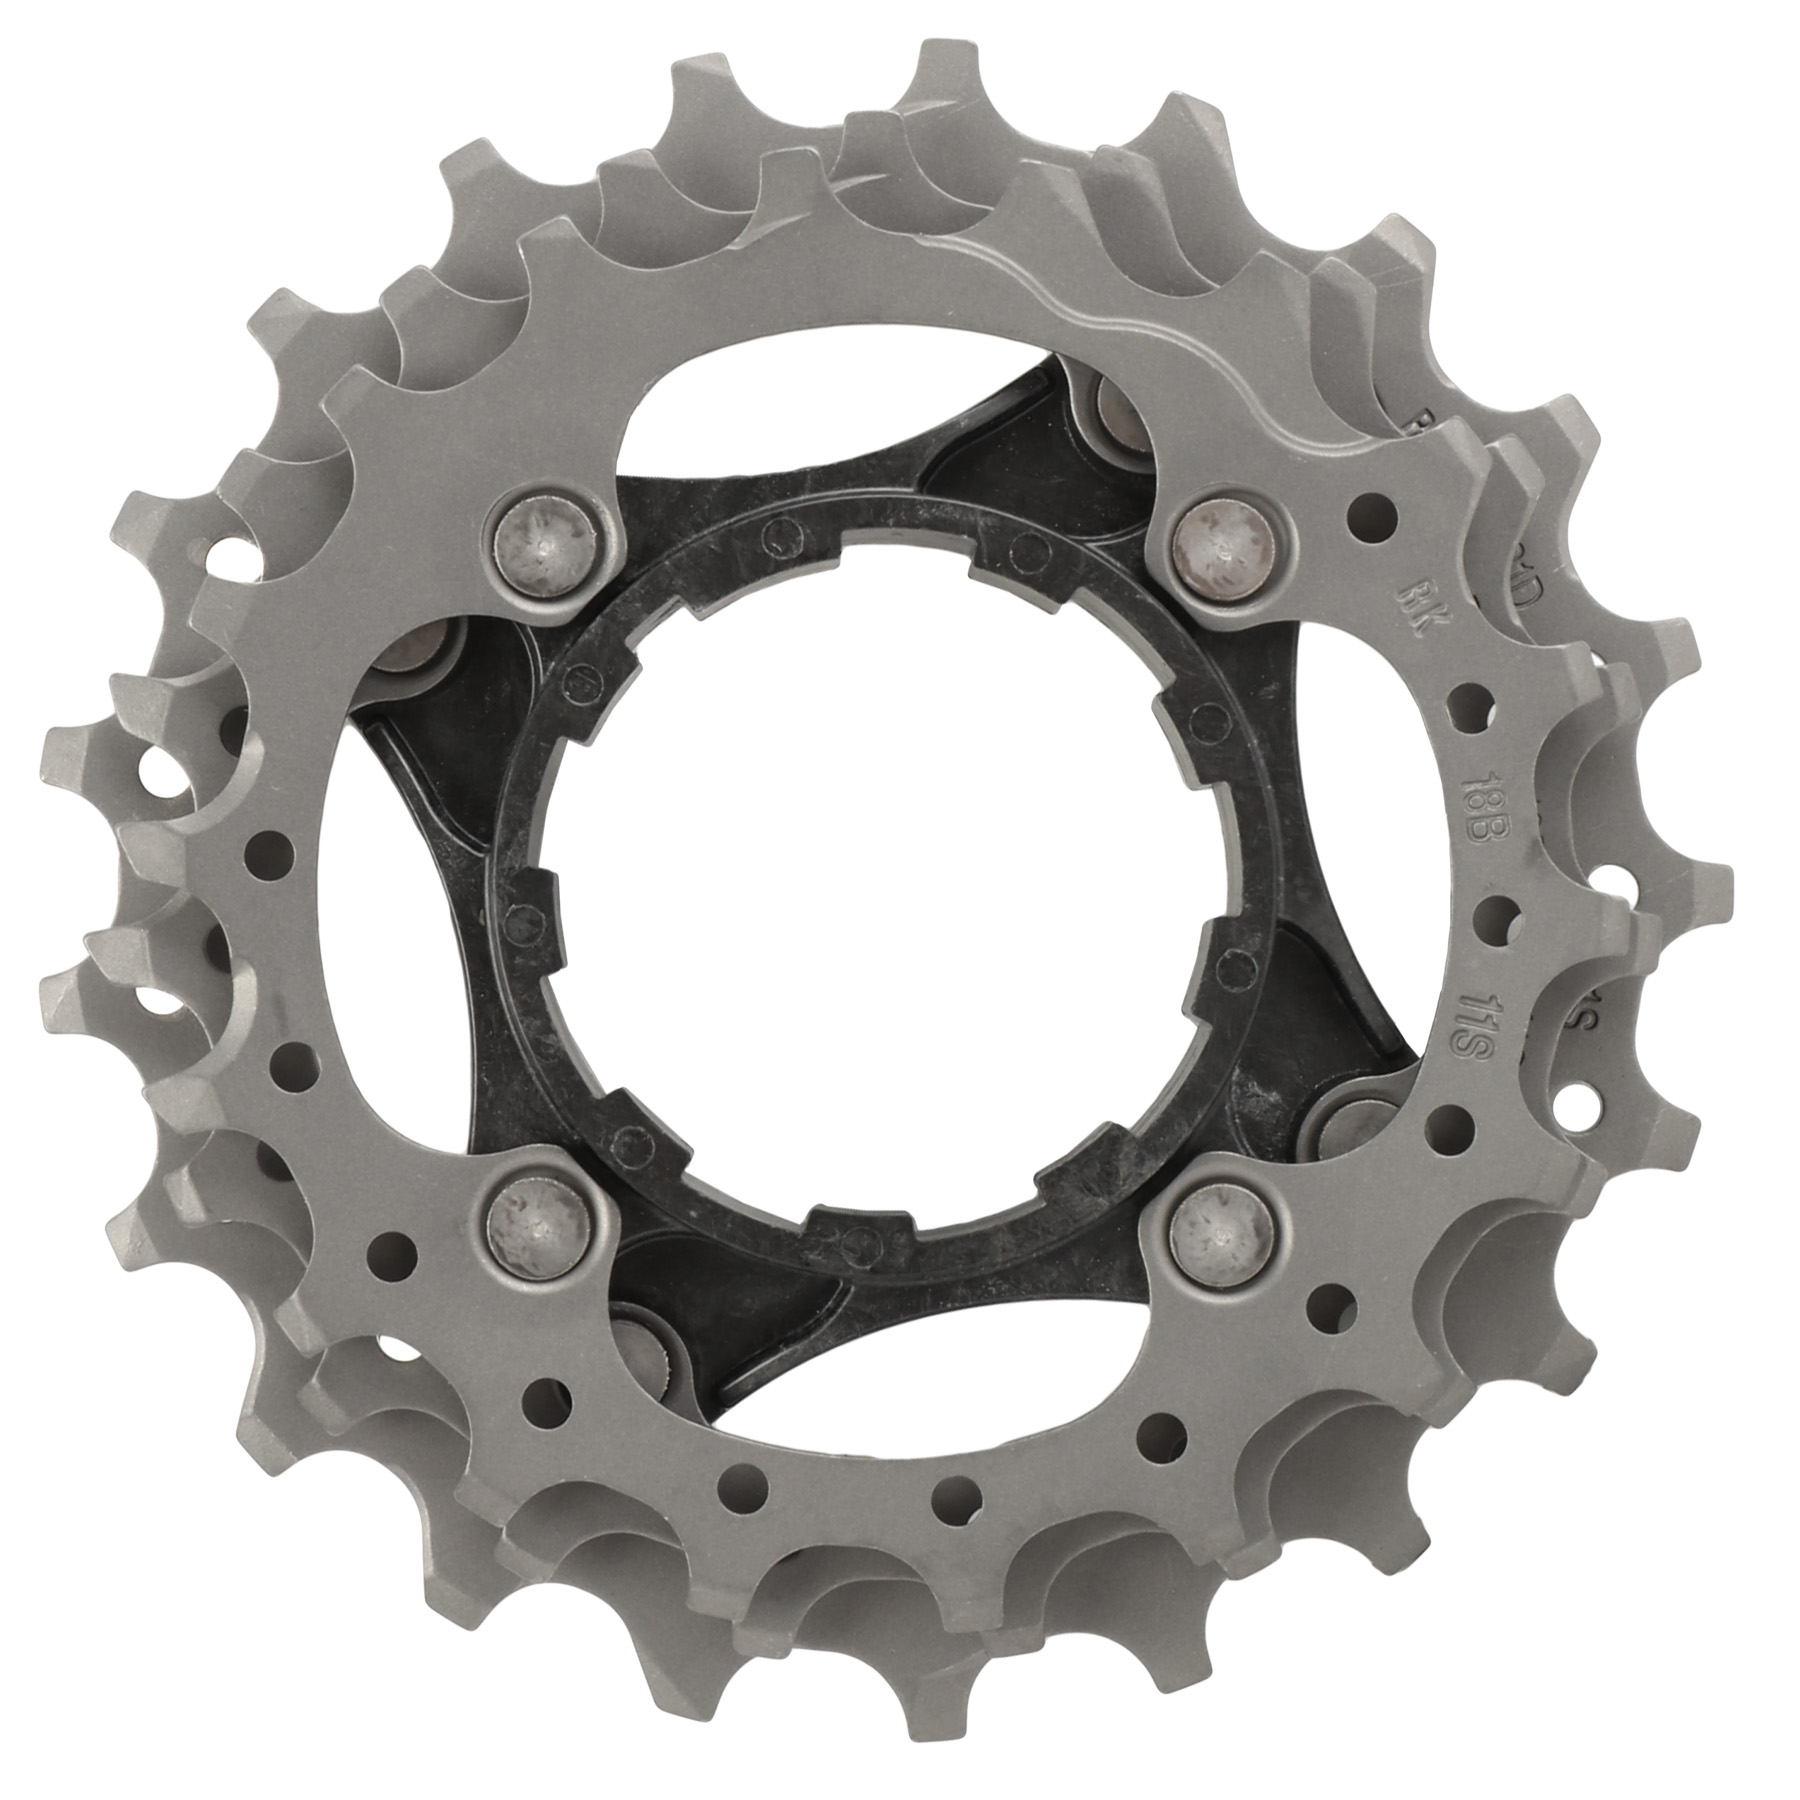 Picture of Shimano Sprocket for Dura Ace 11-Speed Cassette - 18-19-21 T for 12-25 (Y1YC98150) - CS-9000